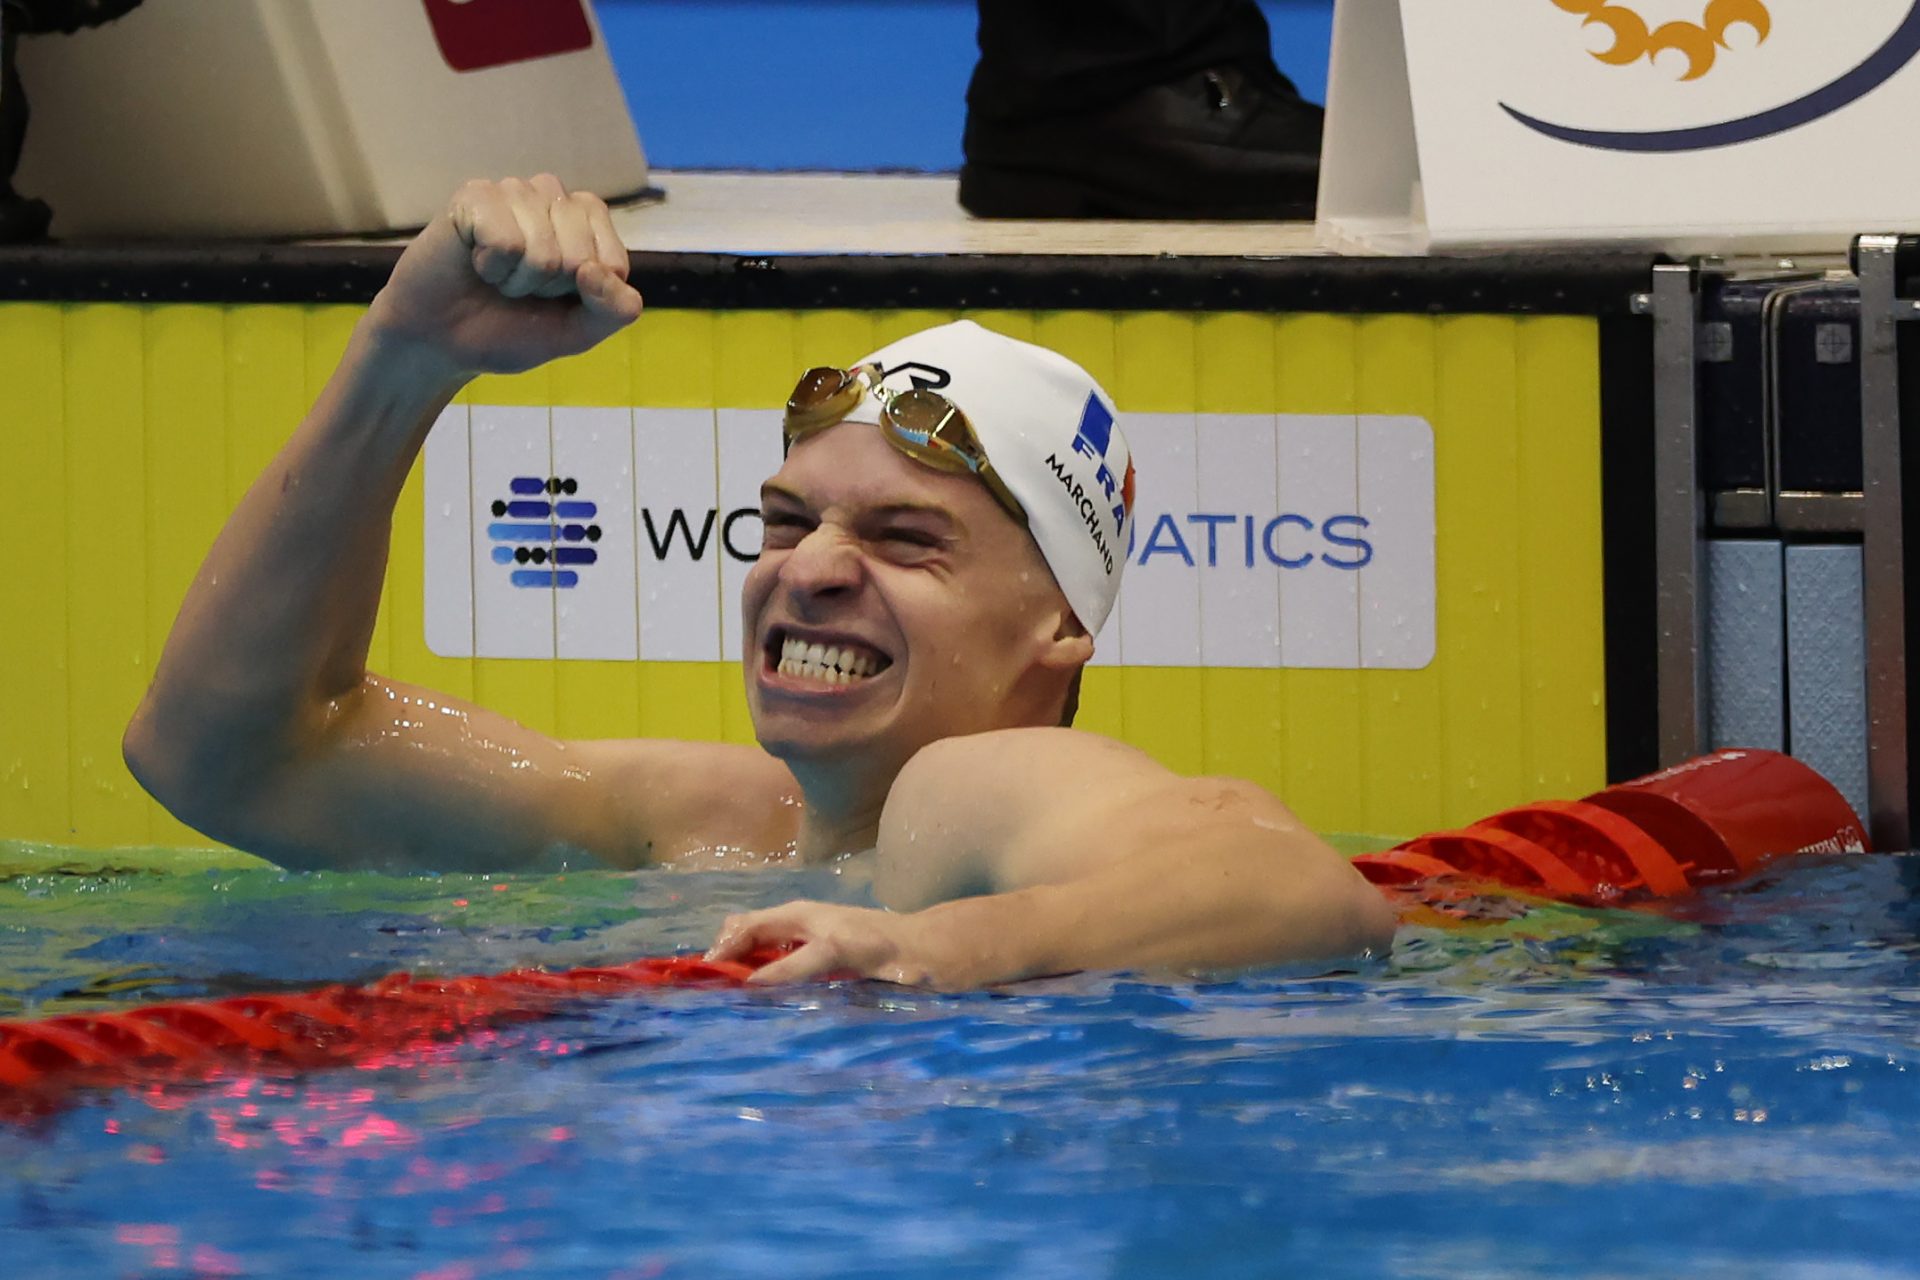 Is record-breaker Leon Marchand better than Michael Phelps?